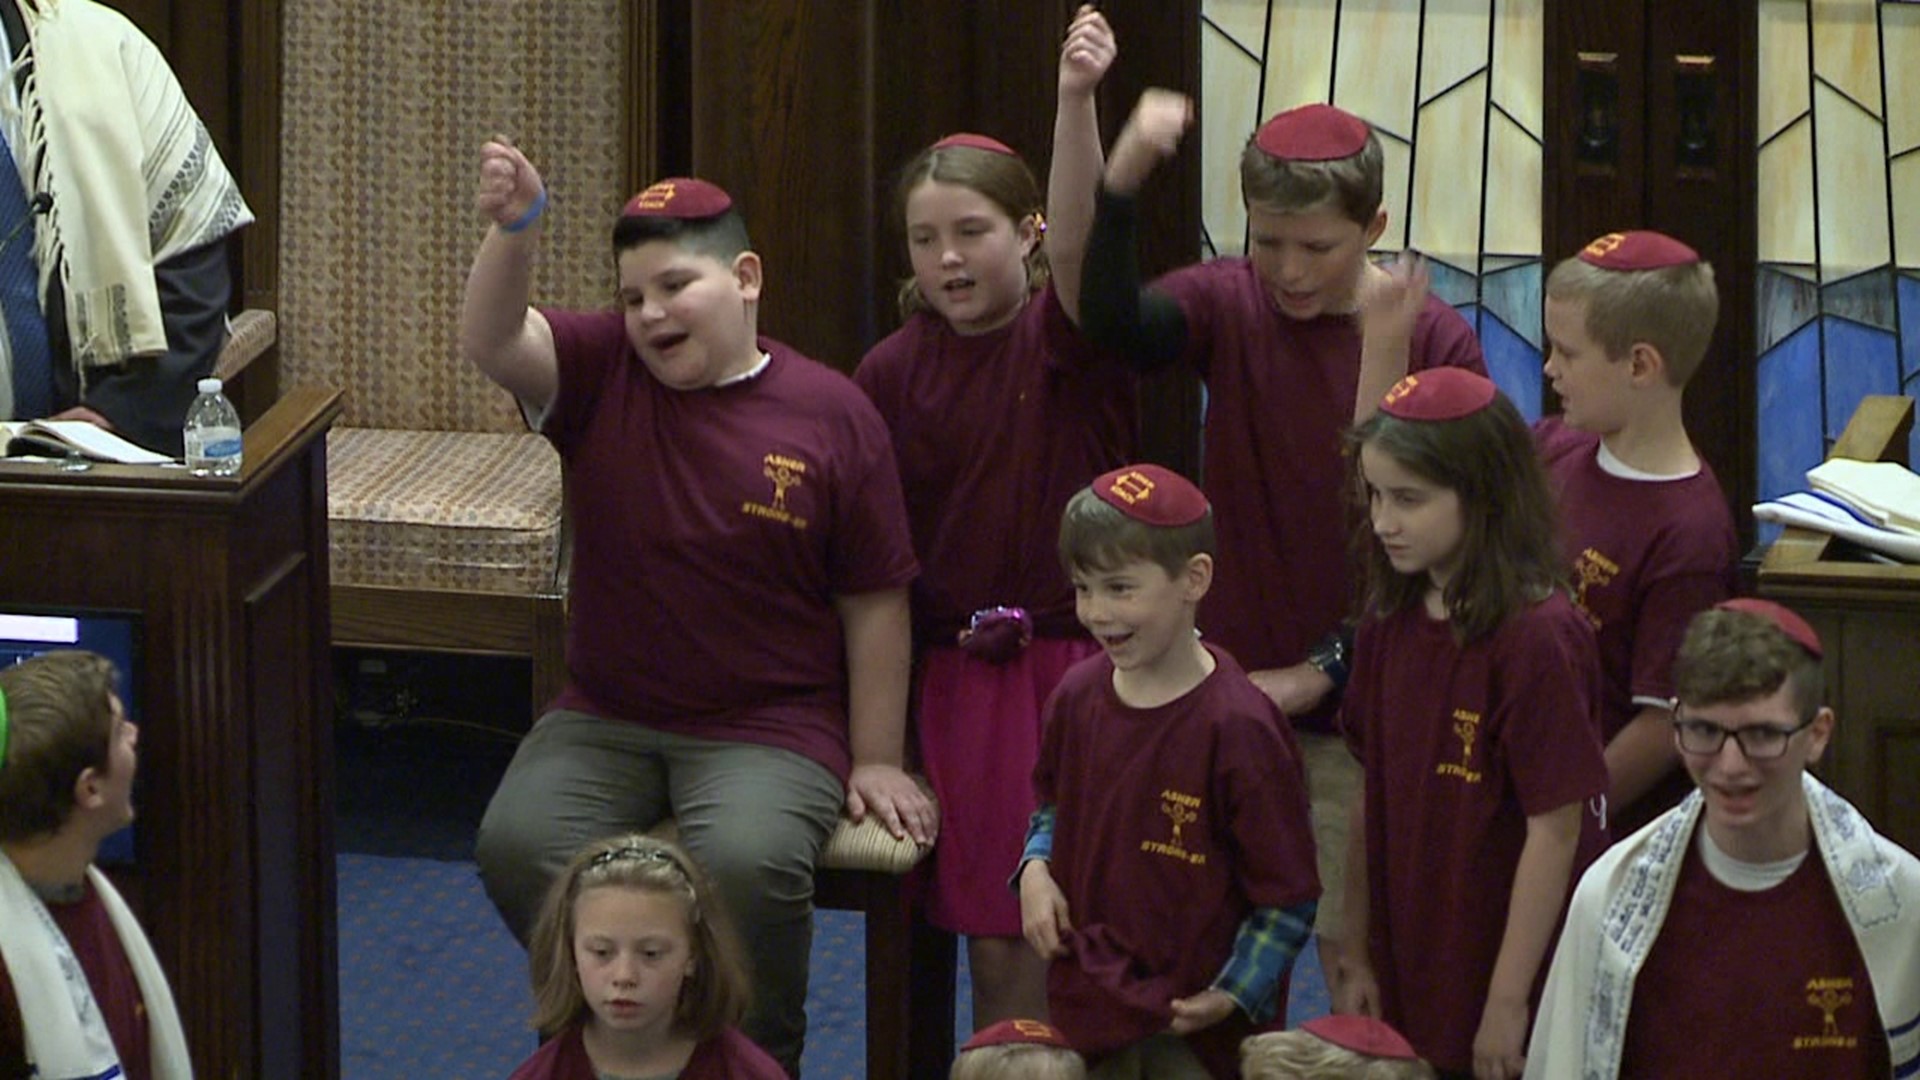 A synagogue in Luzerne County celebrates one of its own; Asher Dicton is now ten years old and cancer free.